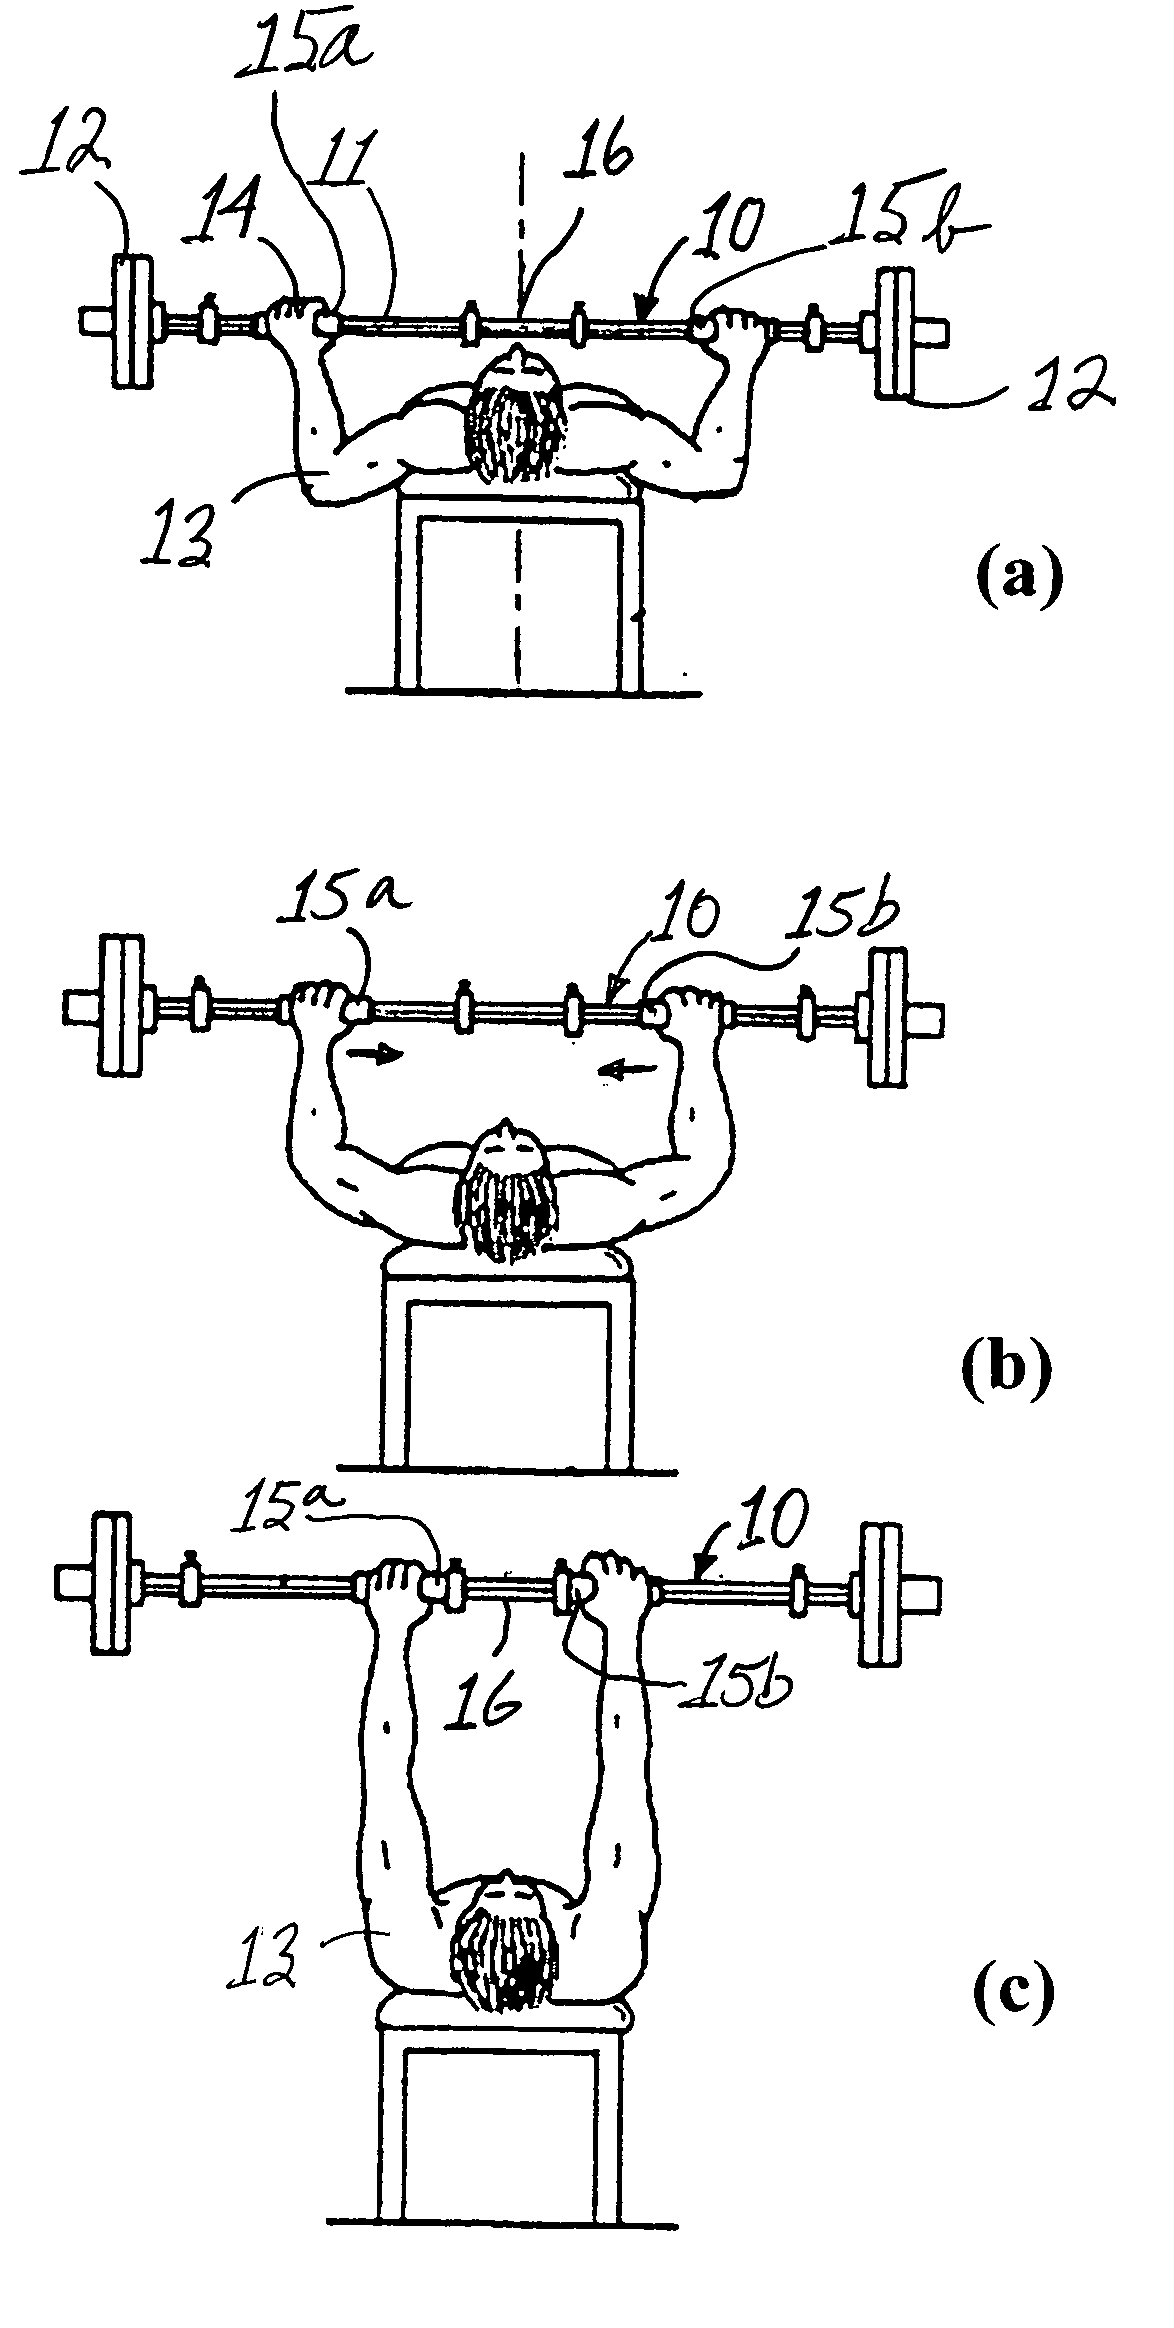 Bar with sliding handgrips for resistance exercise devices